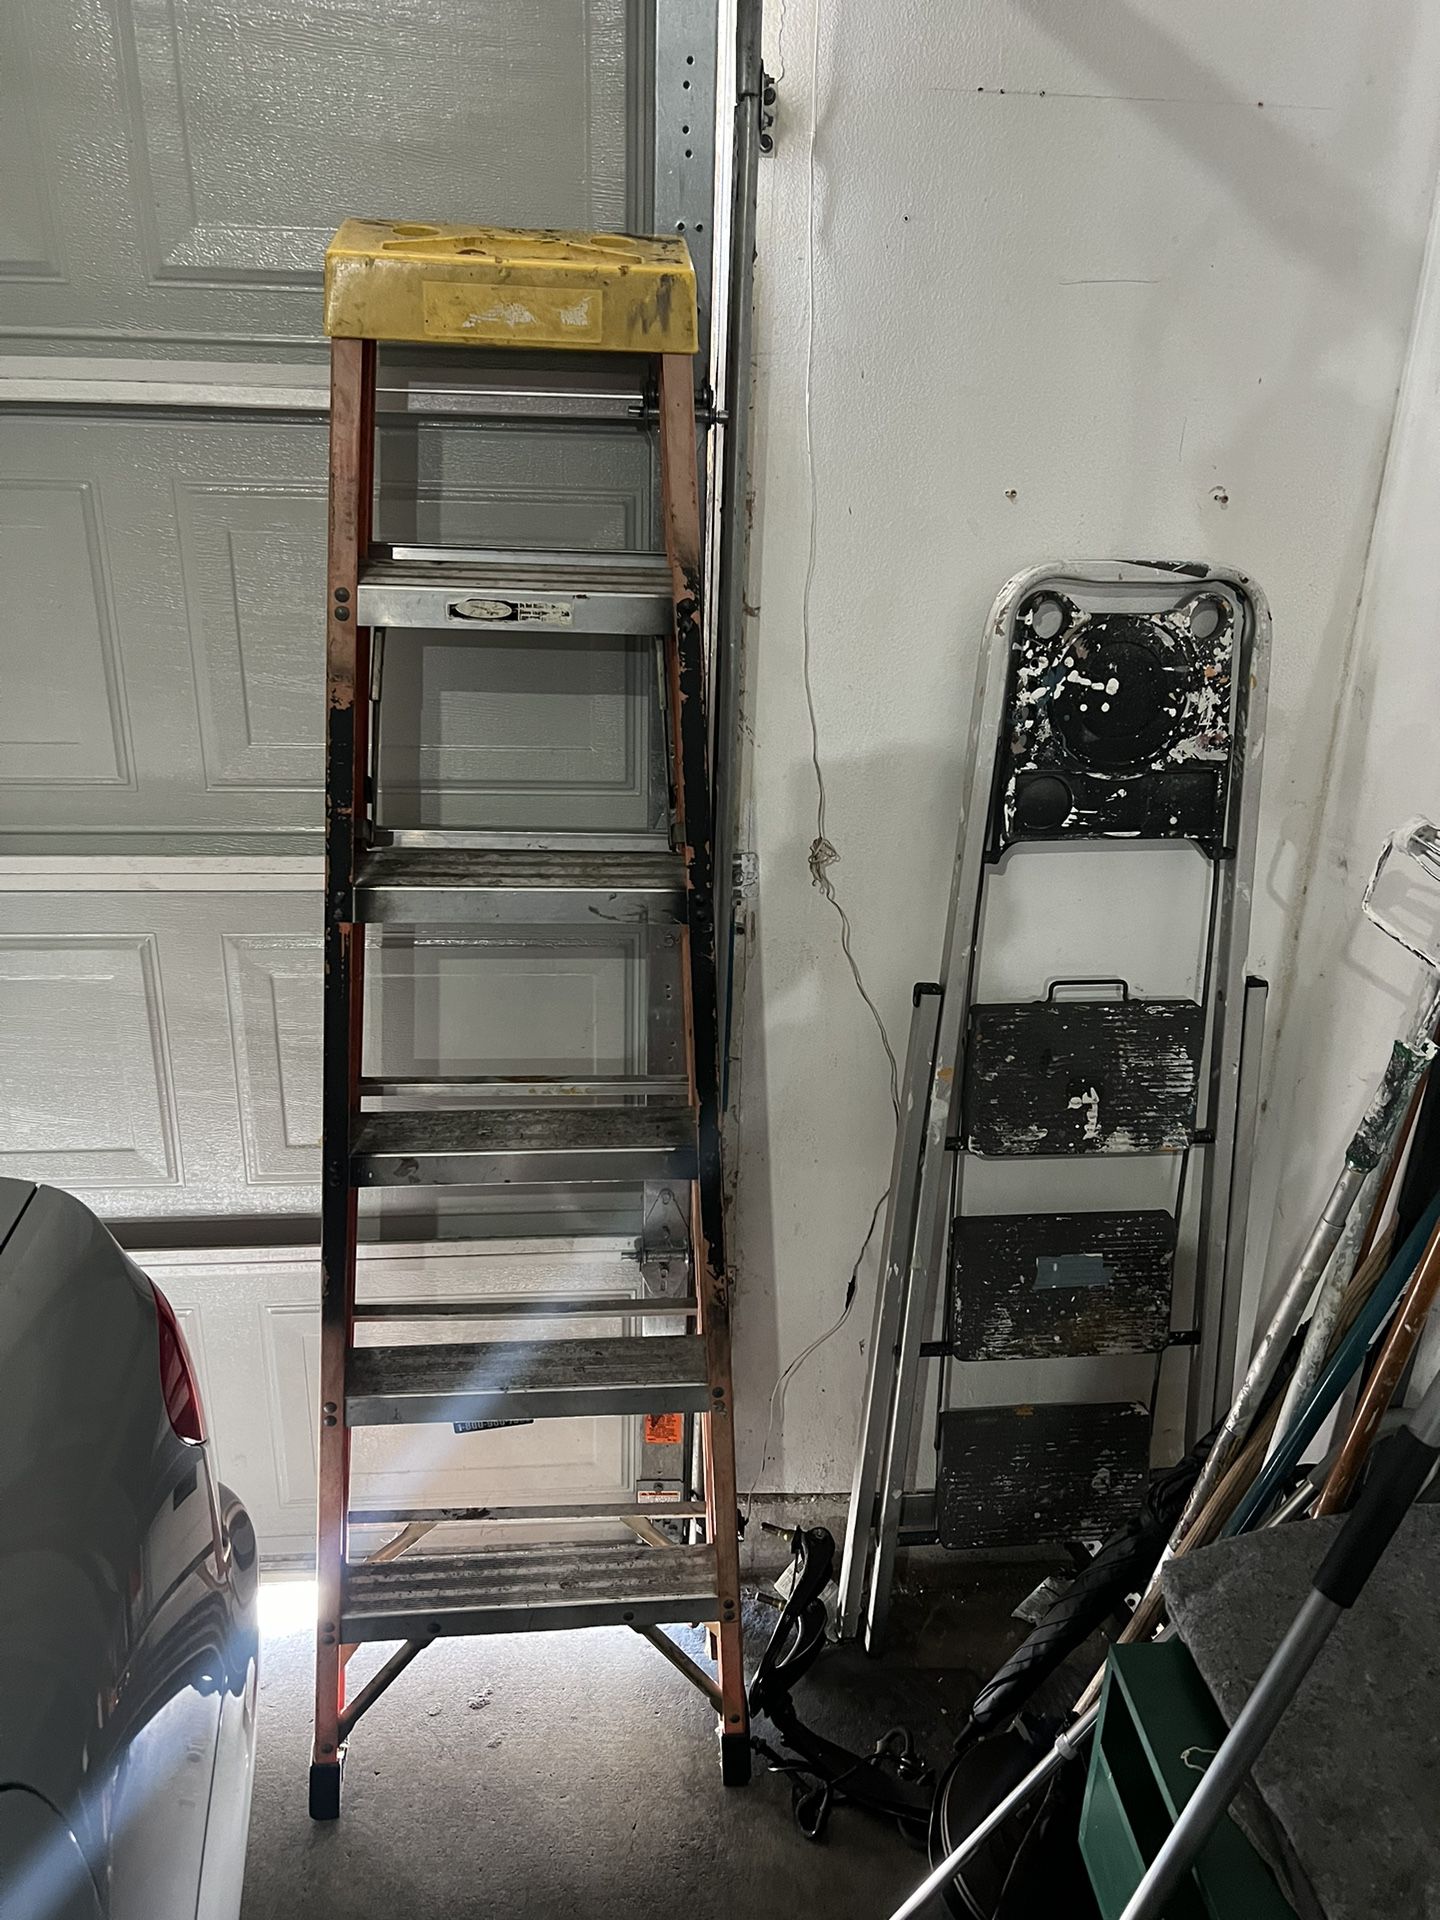 6ft And 3-4 Ft Ladder $25.00